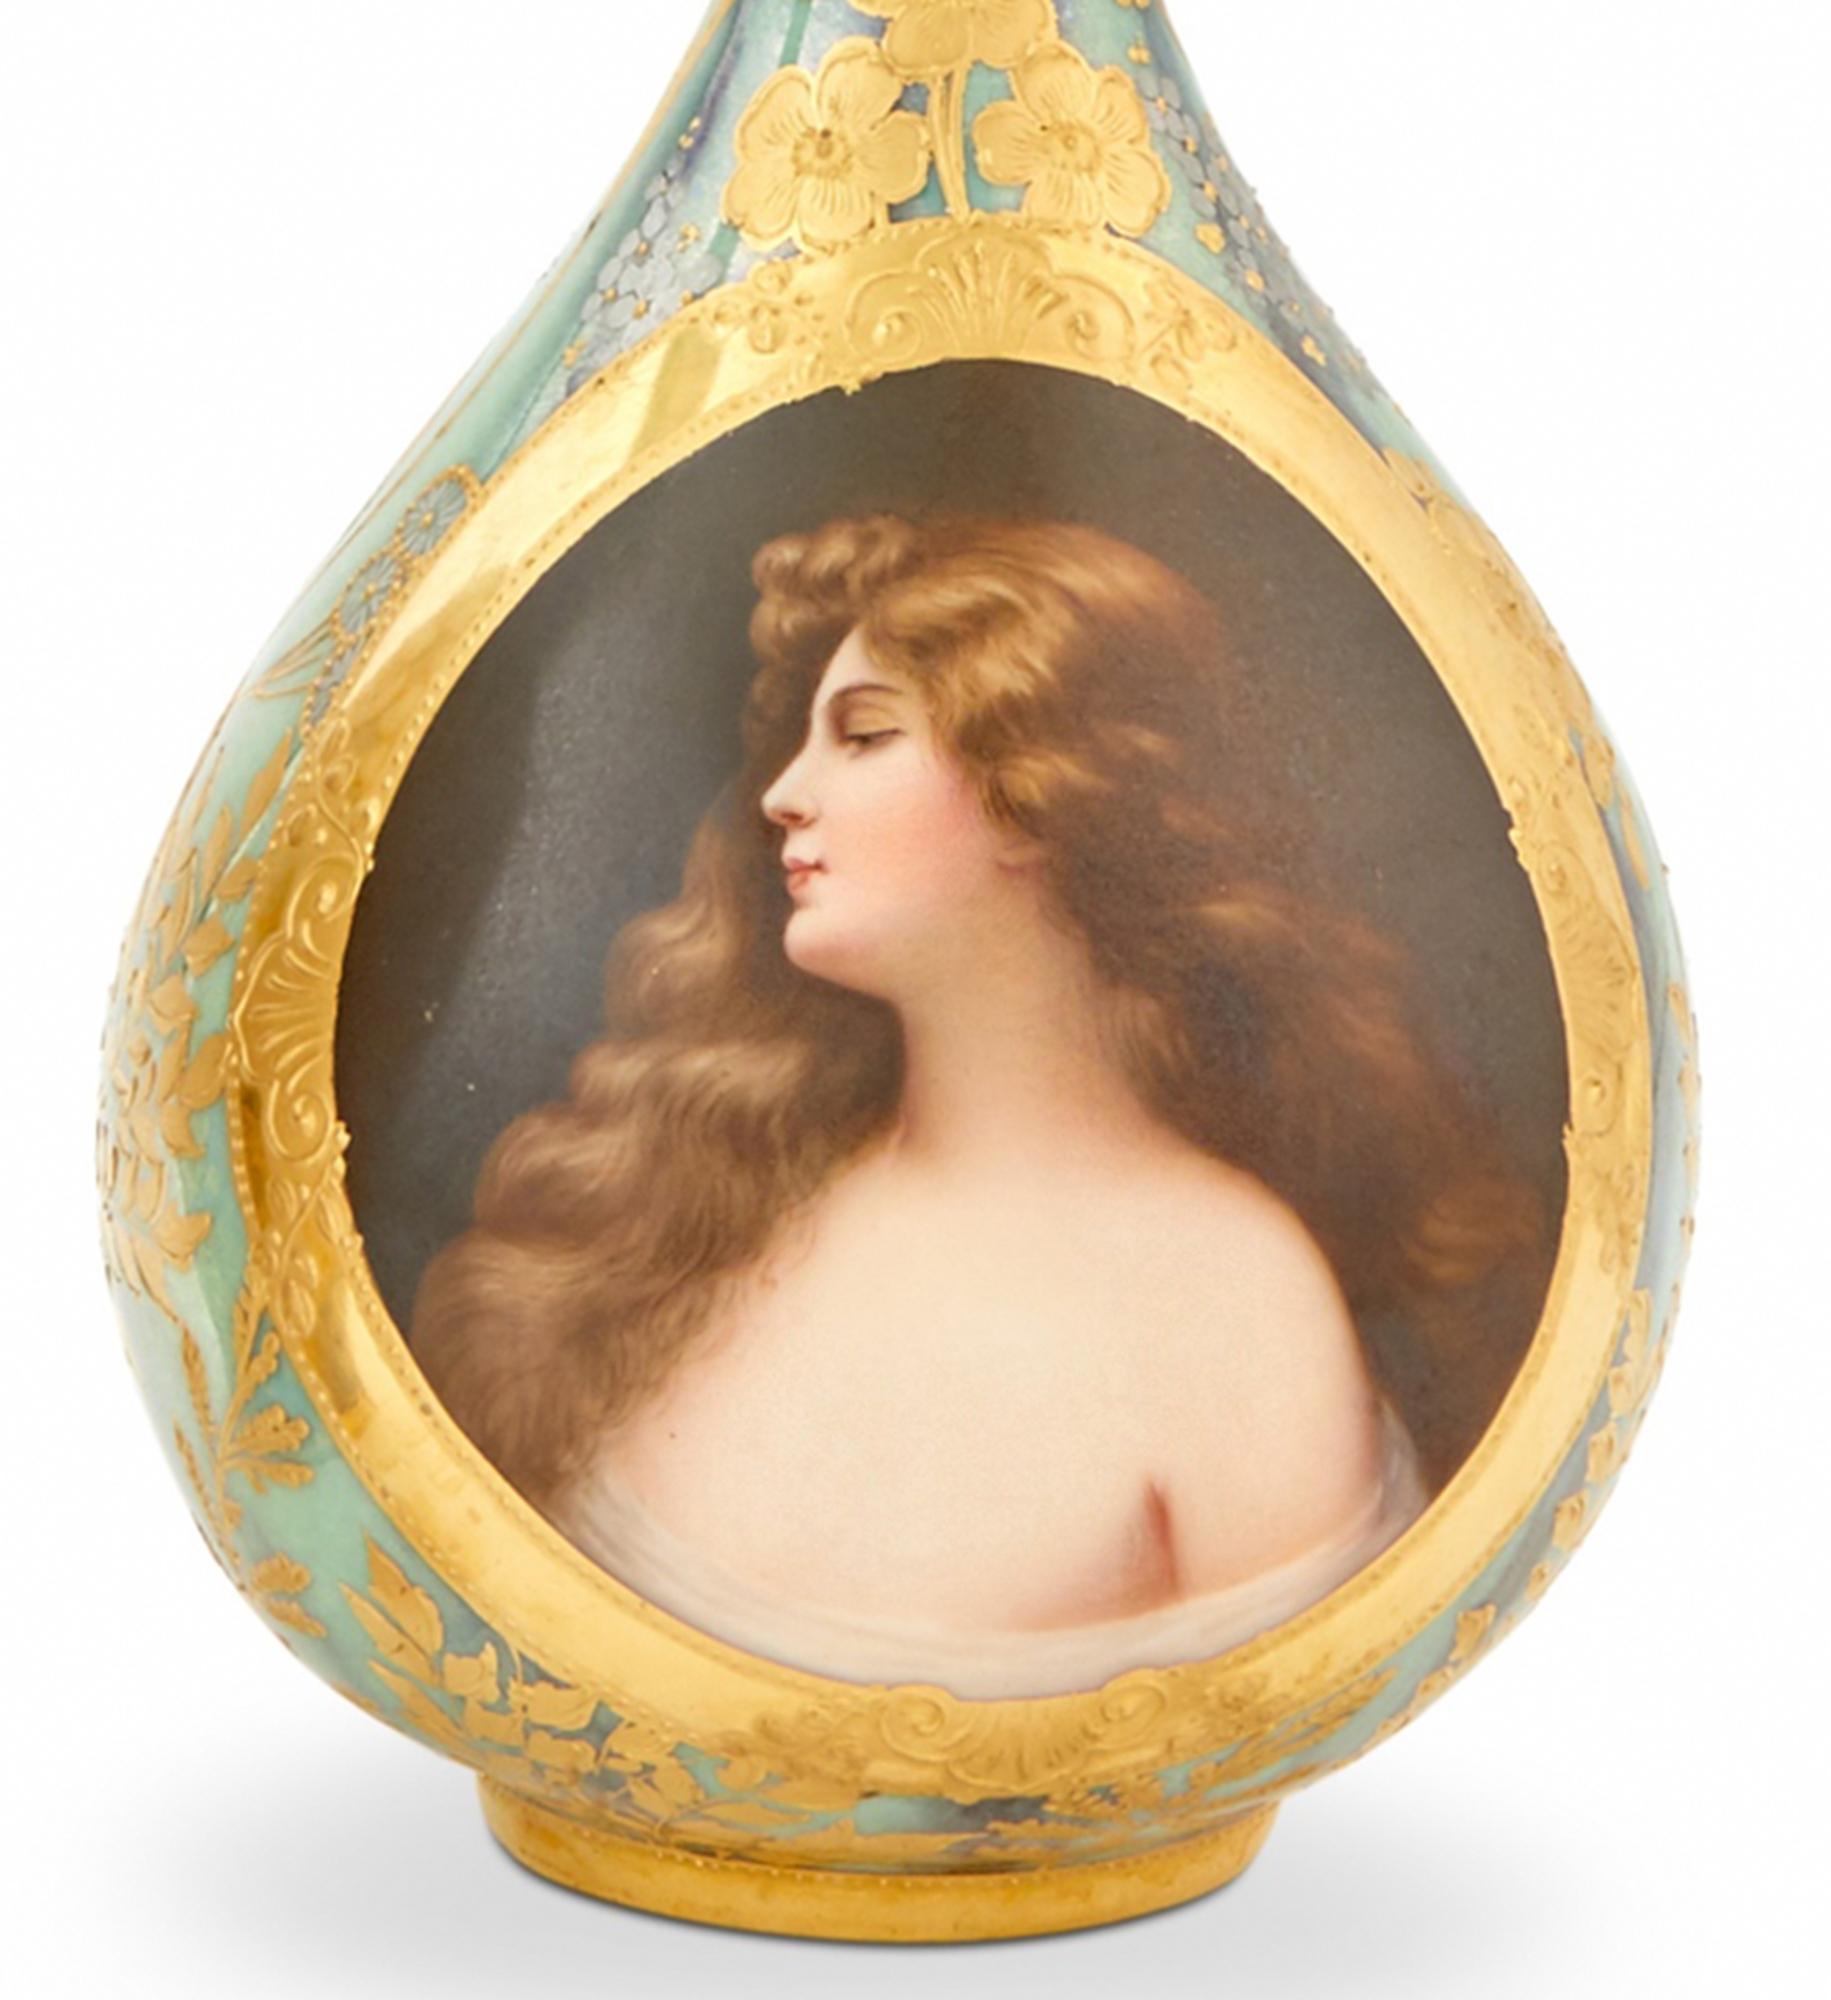 Fine royal Vienna portrait vase of a soft faced beauty with cascading wavy hair, brown eyes and a neutral expression is encircled by a band of polychrome gold paint with raised painted ornaments. Blue from the neck flows downwards, diffusing into a